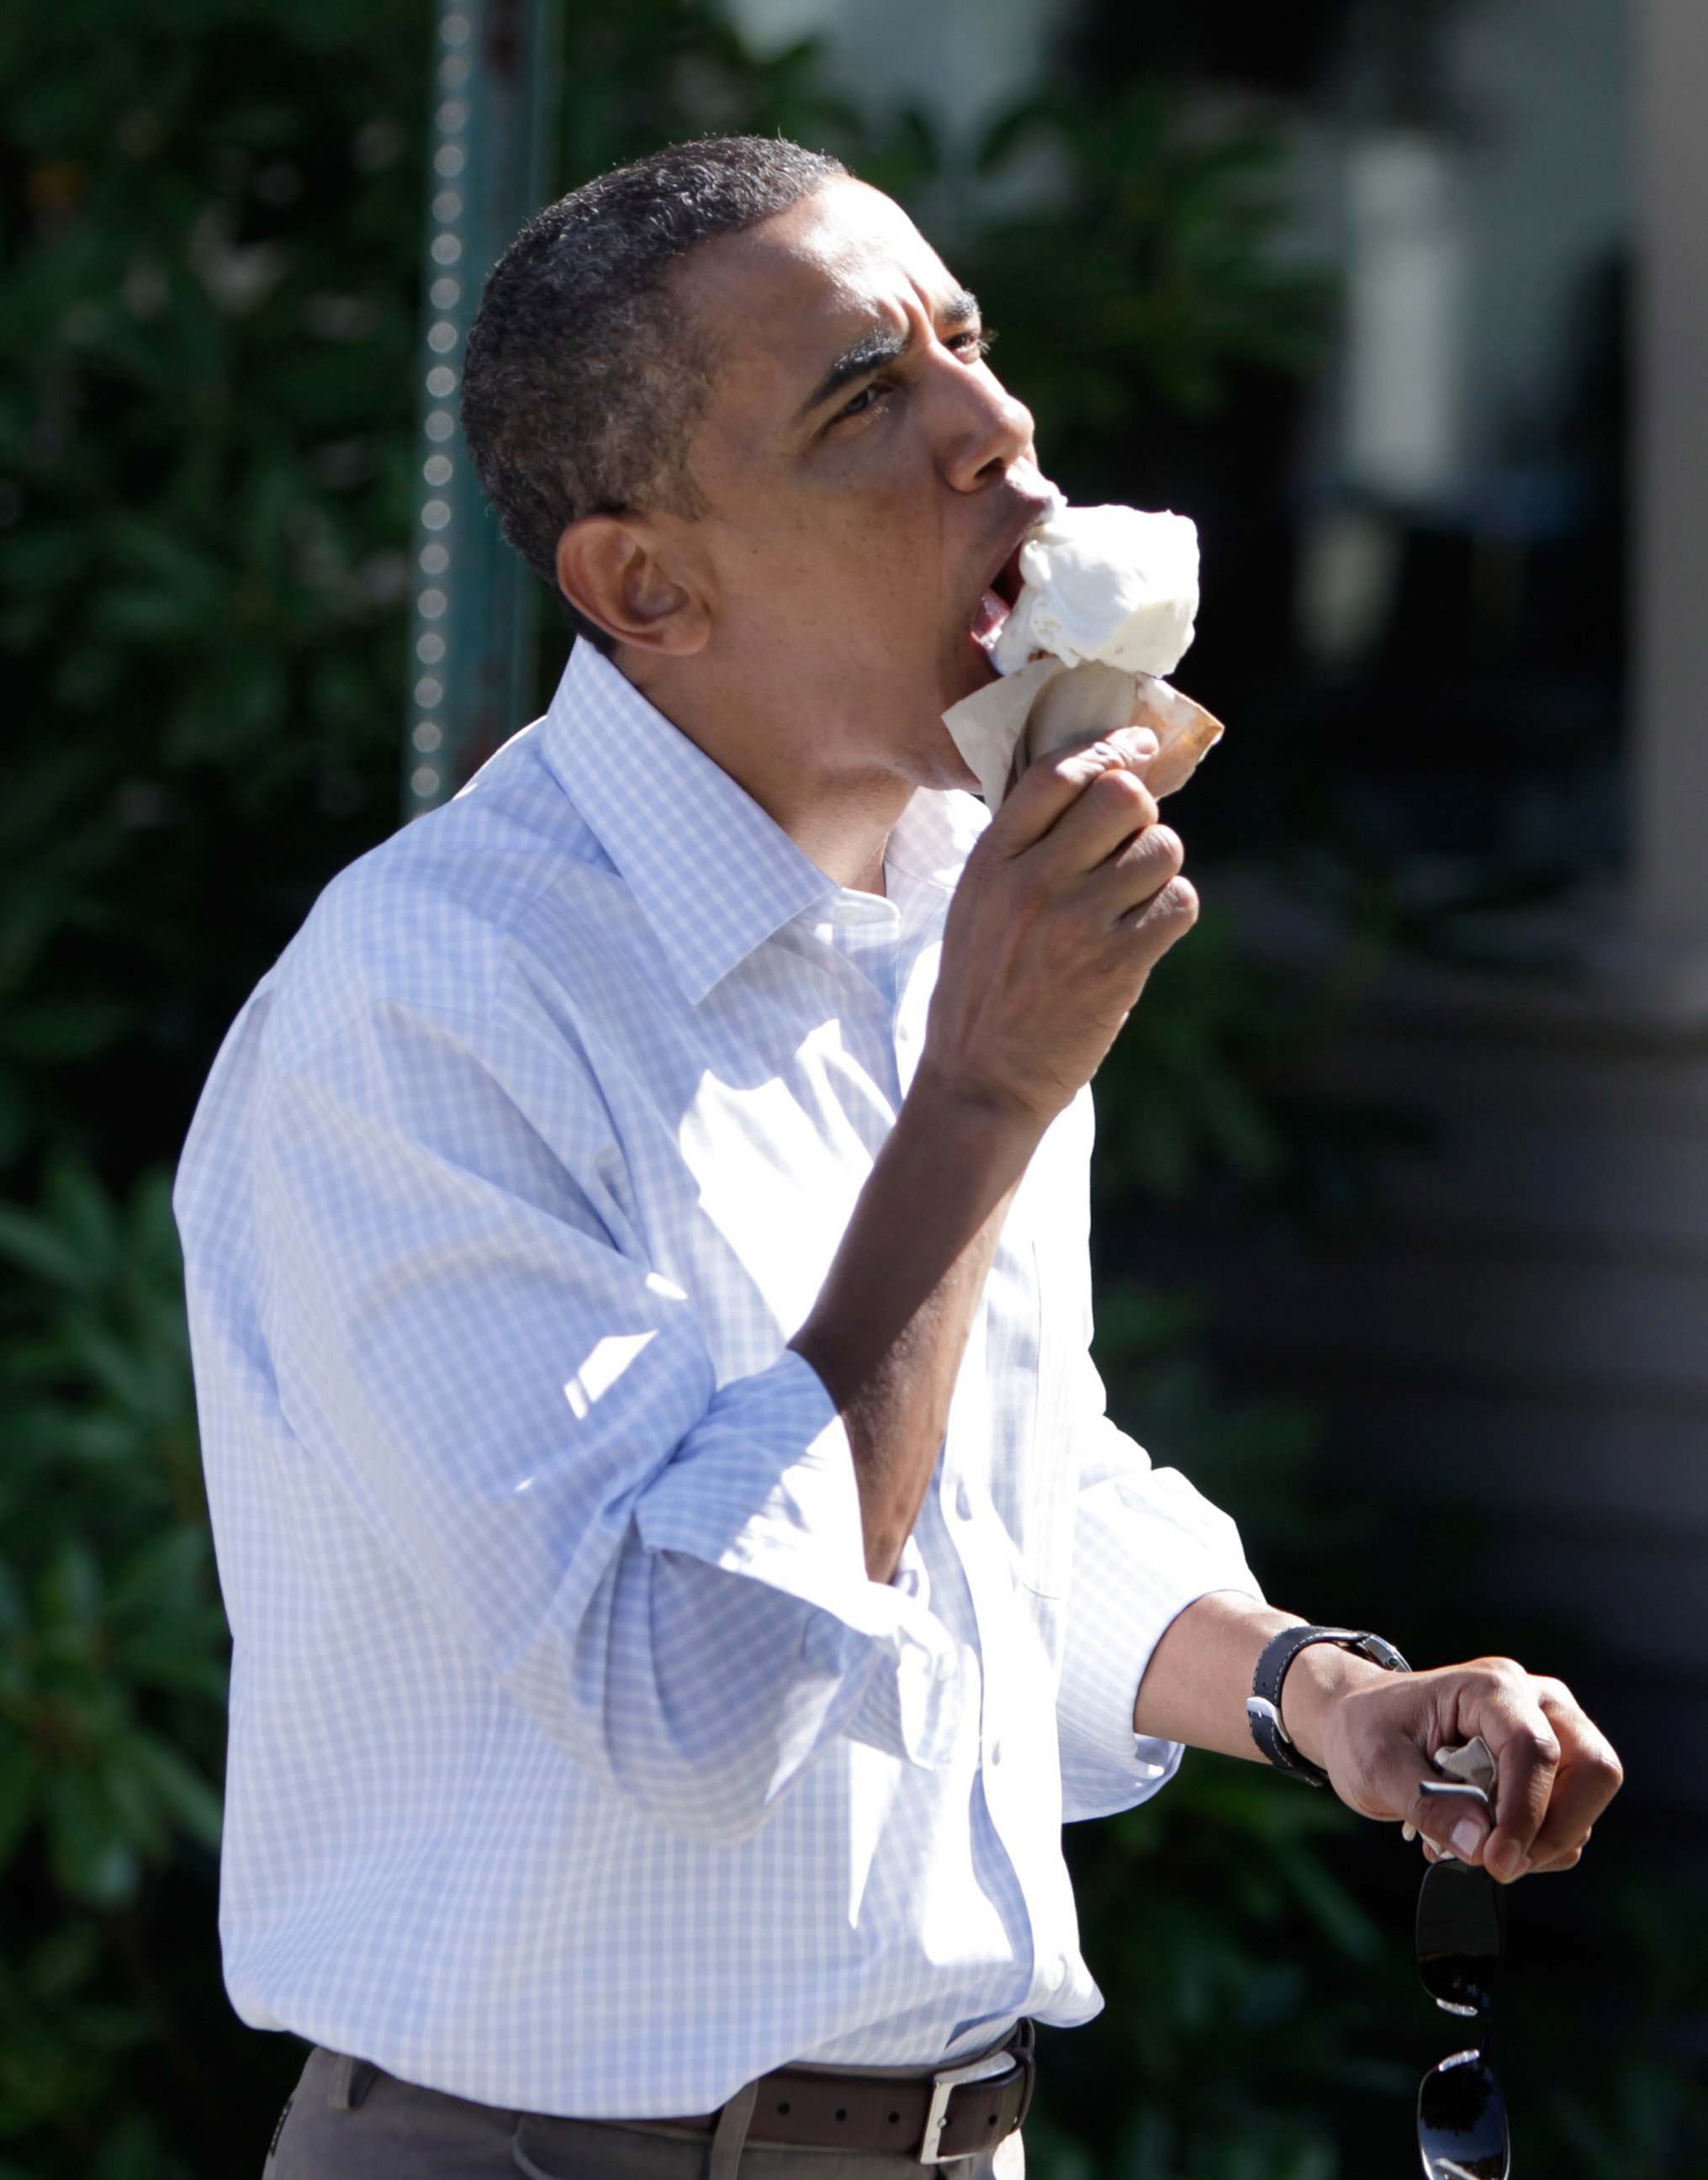 PHOTO: President Barack Obama eats ice cream during the first family's weekend vacation in Bar Harbor, Maine, on July 16, 2010.